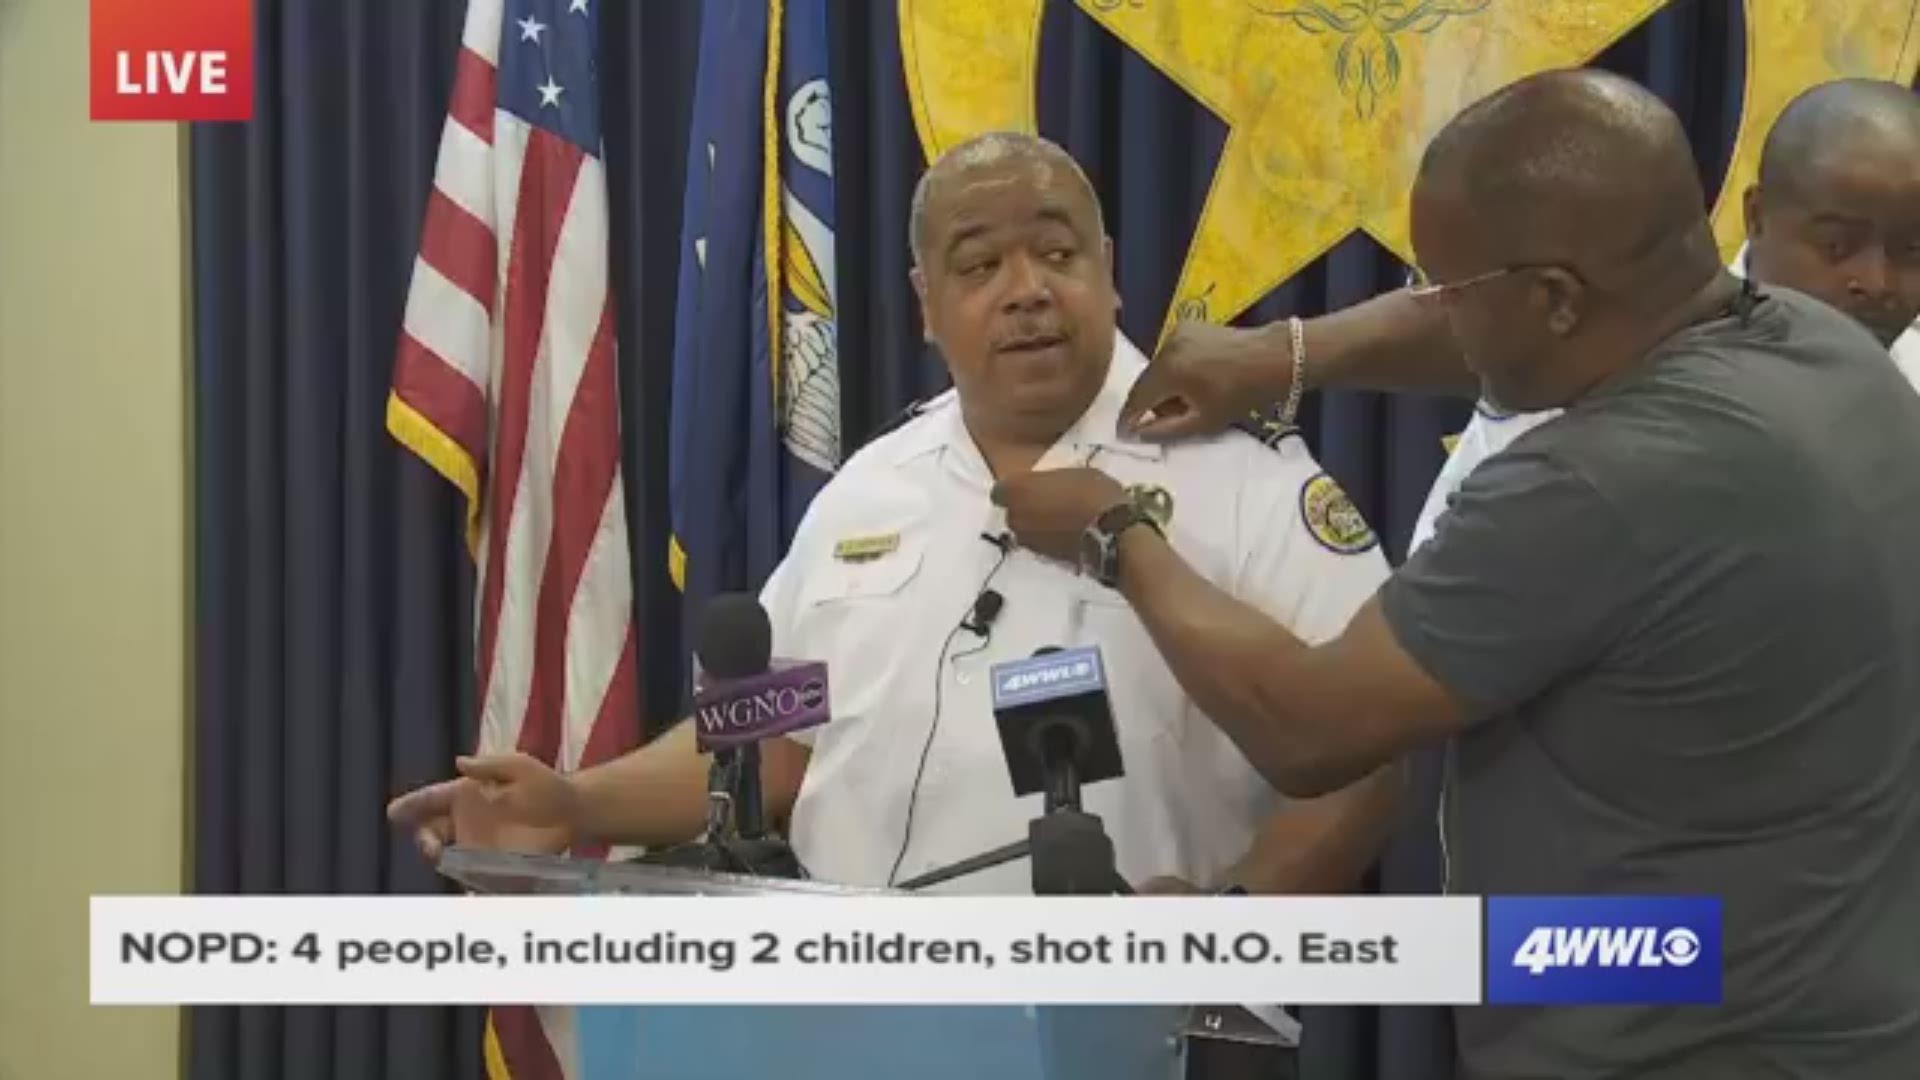 NOPD Superintendent Michael Harrison provides an update after 4 people, including 2 children, were shot in N.O. East.